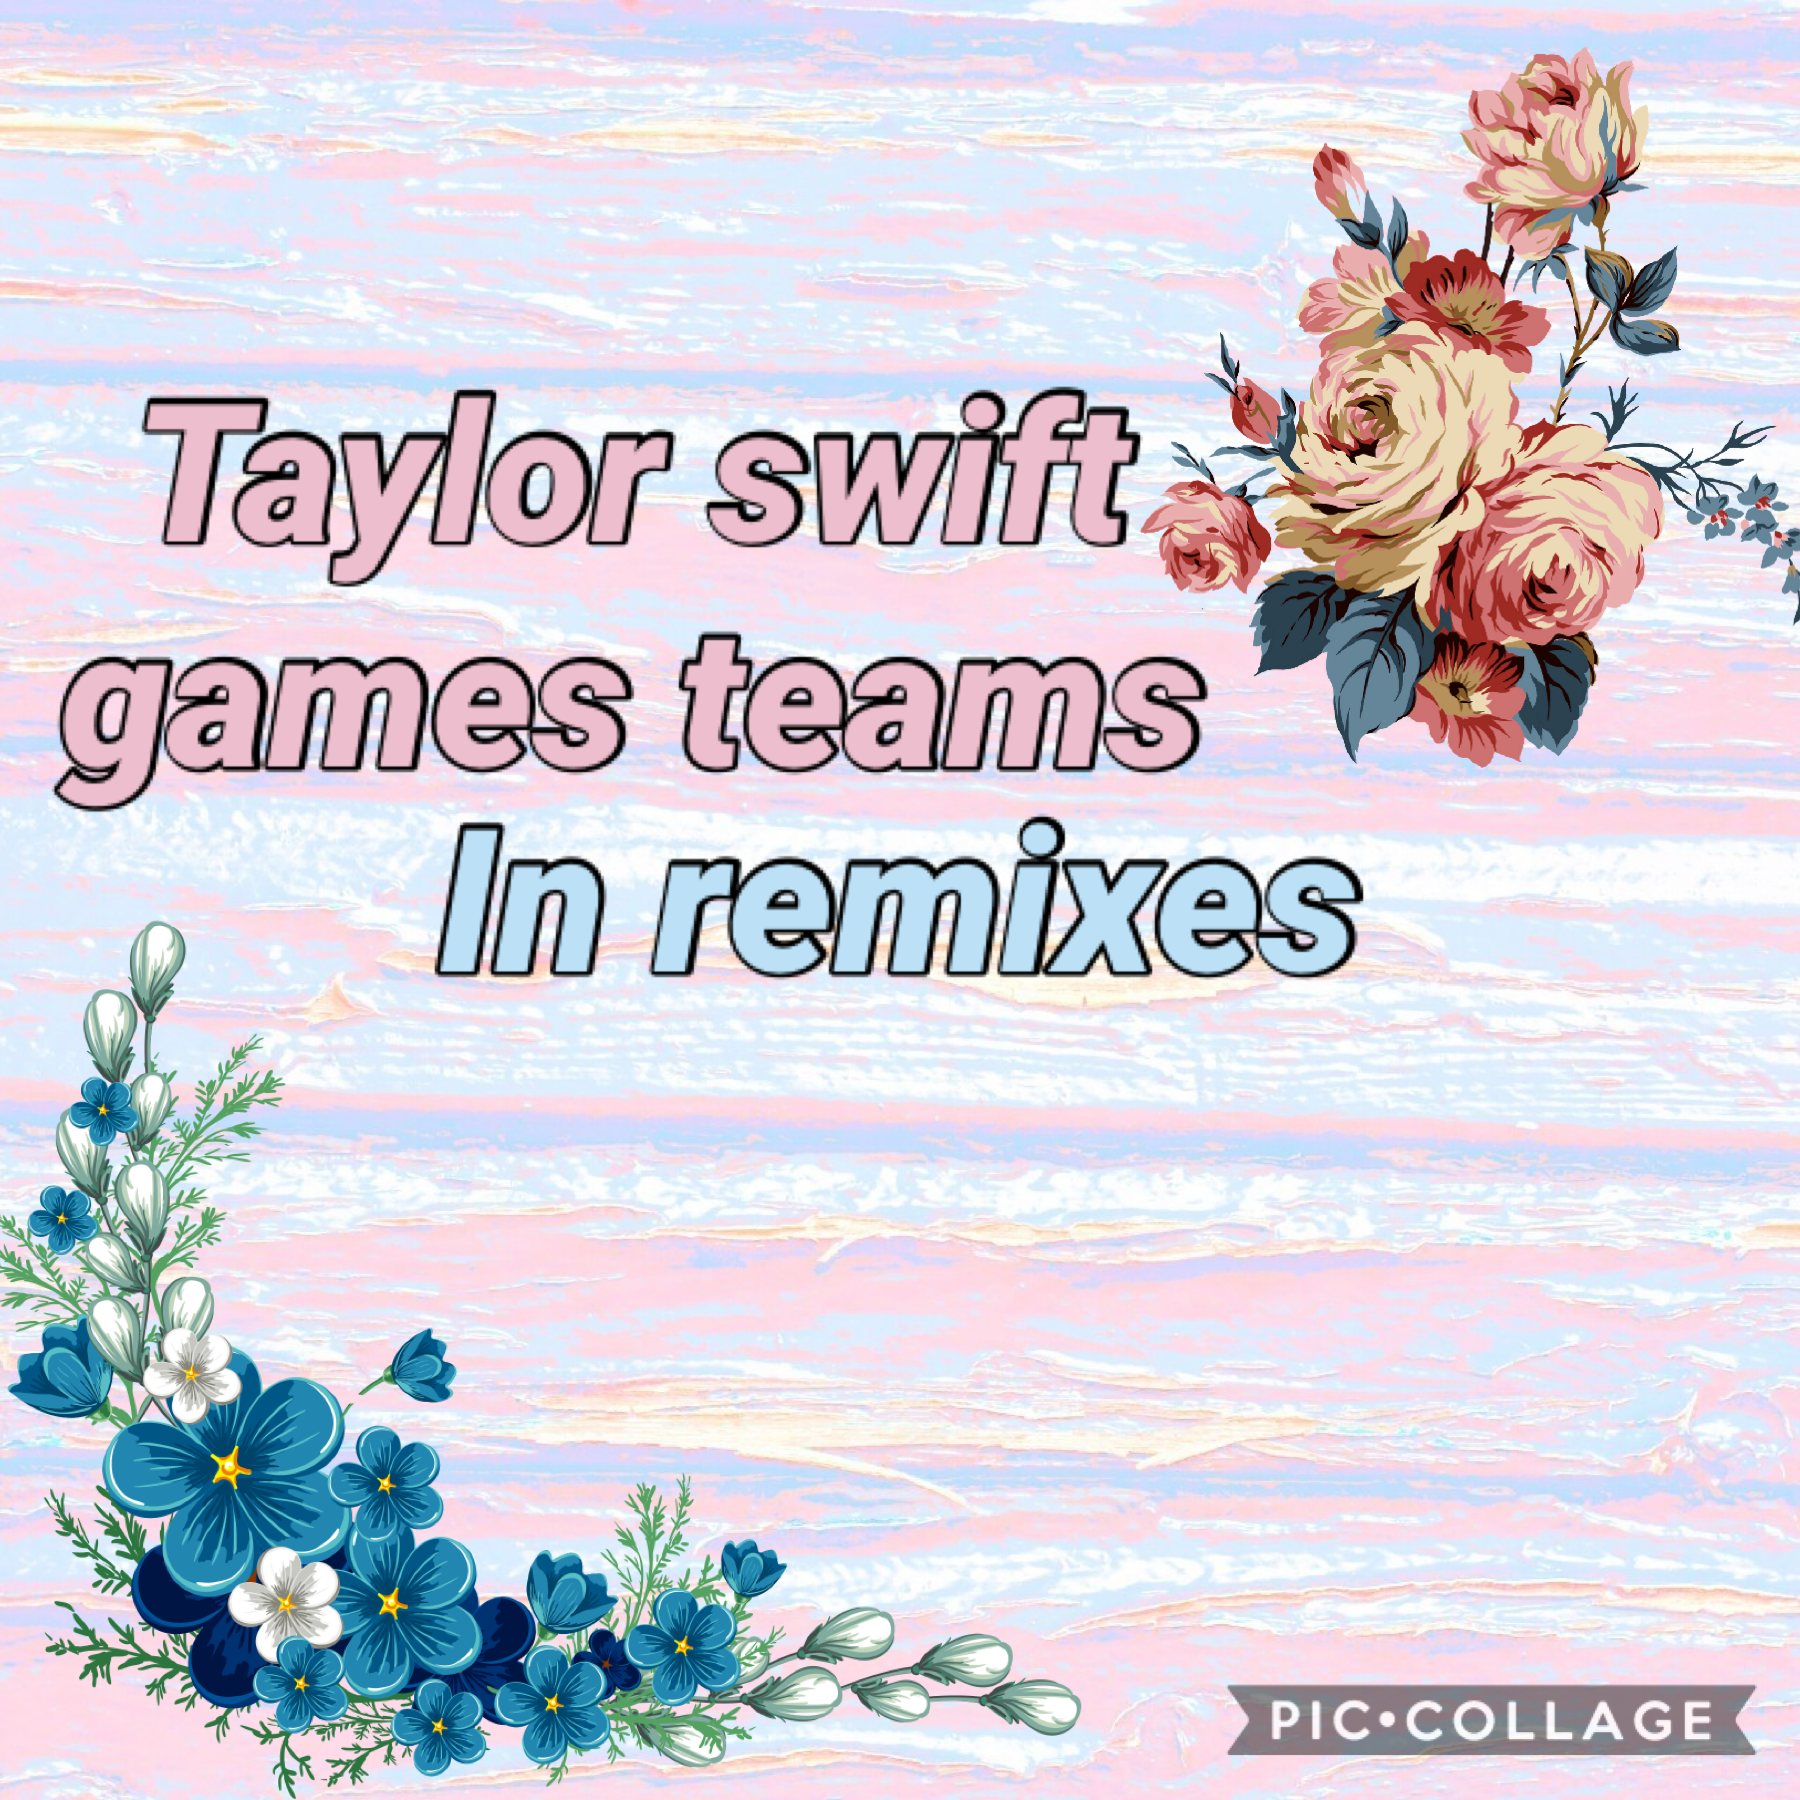 Taylor Swift teams for the games are in the responses